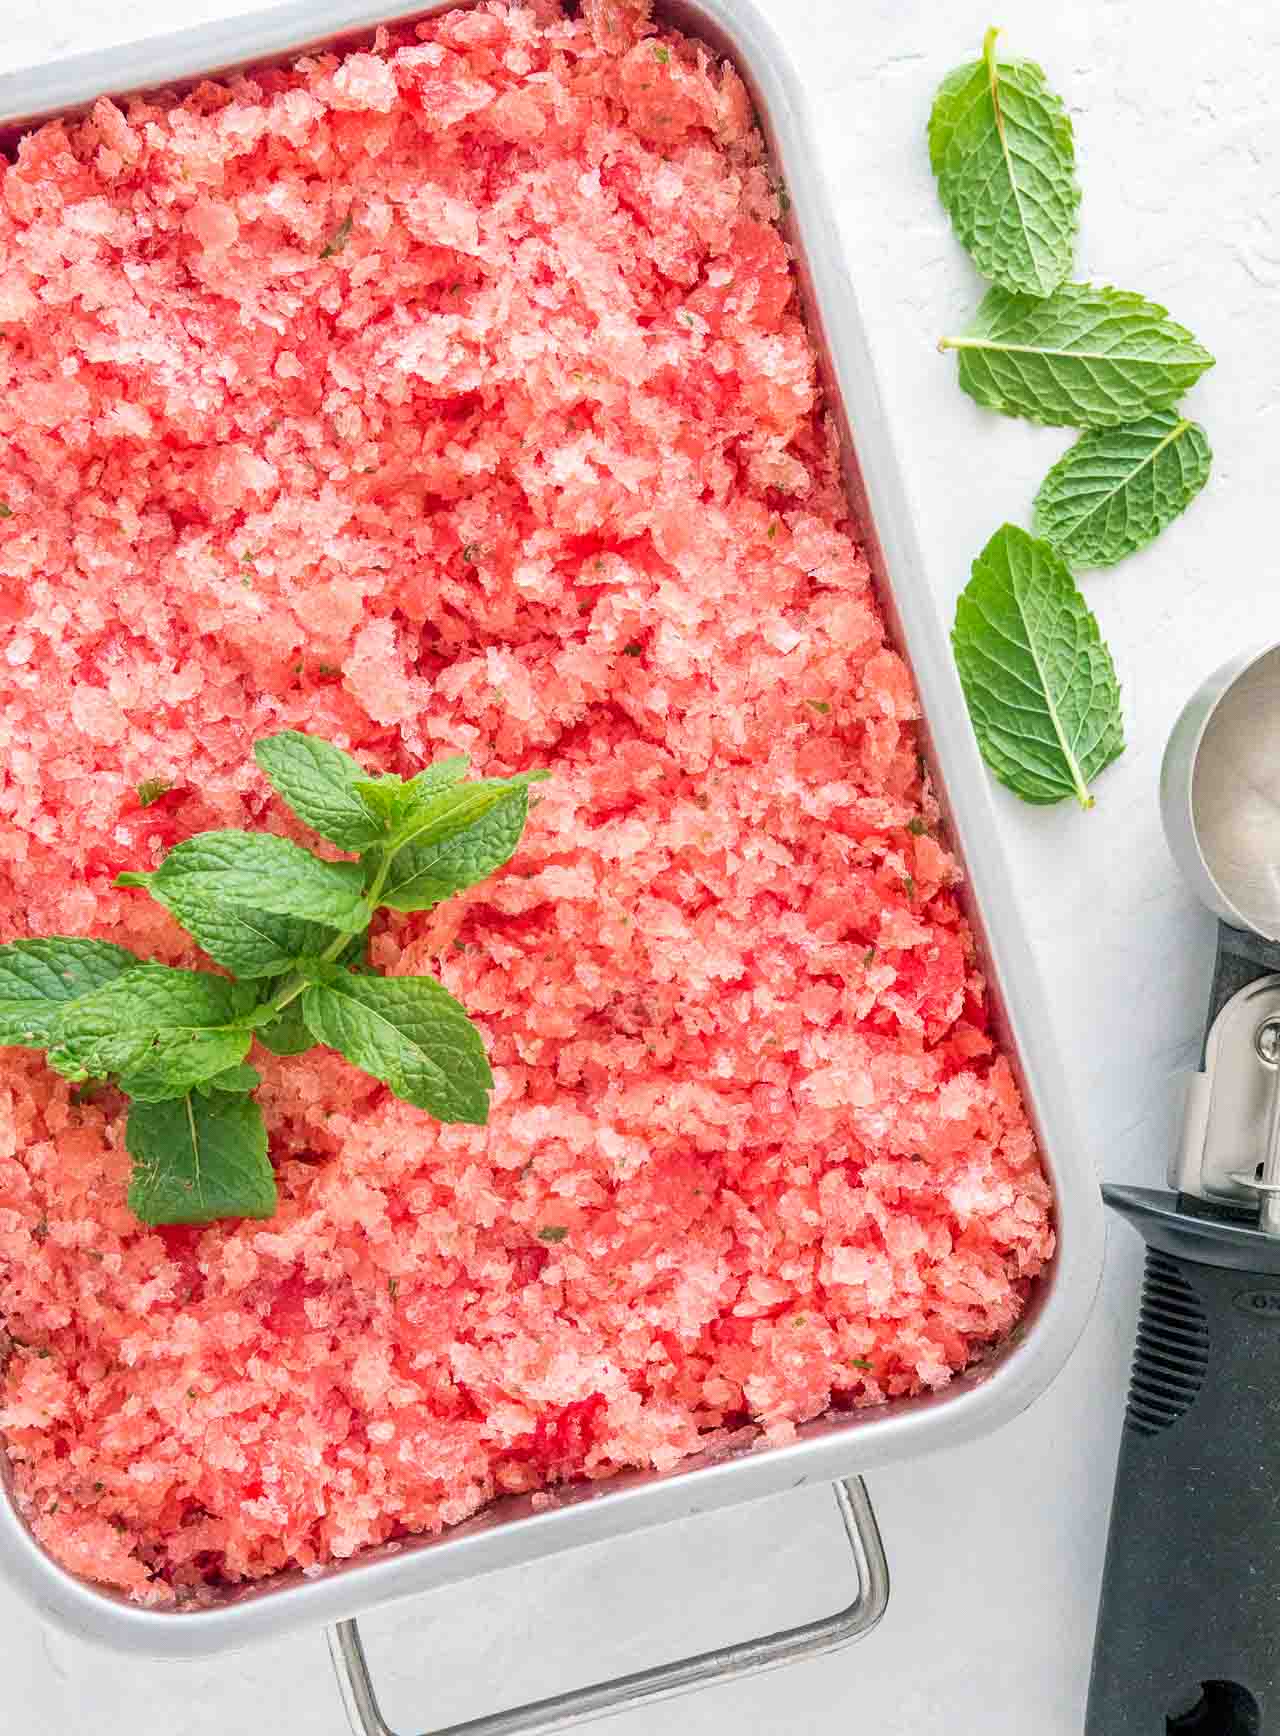 A stainless steel baking pan of pink watermelon granita garnished with mint with an ice cream scoop next to it.